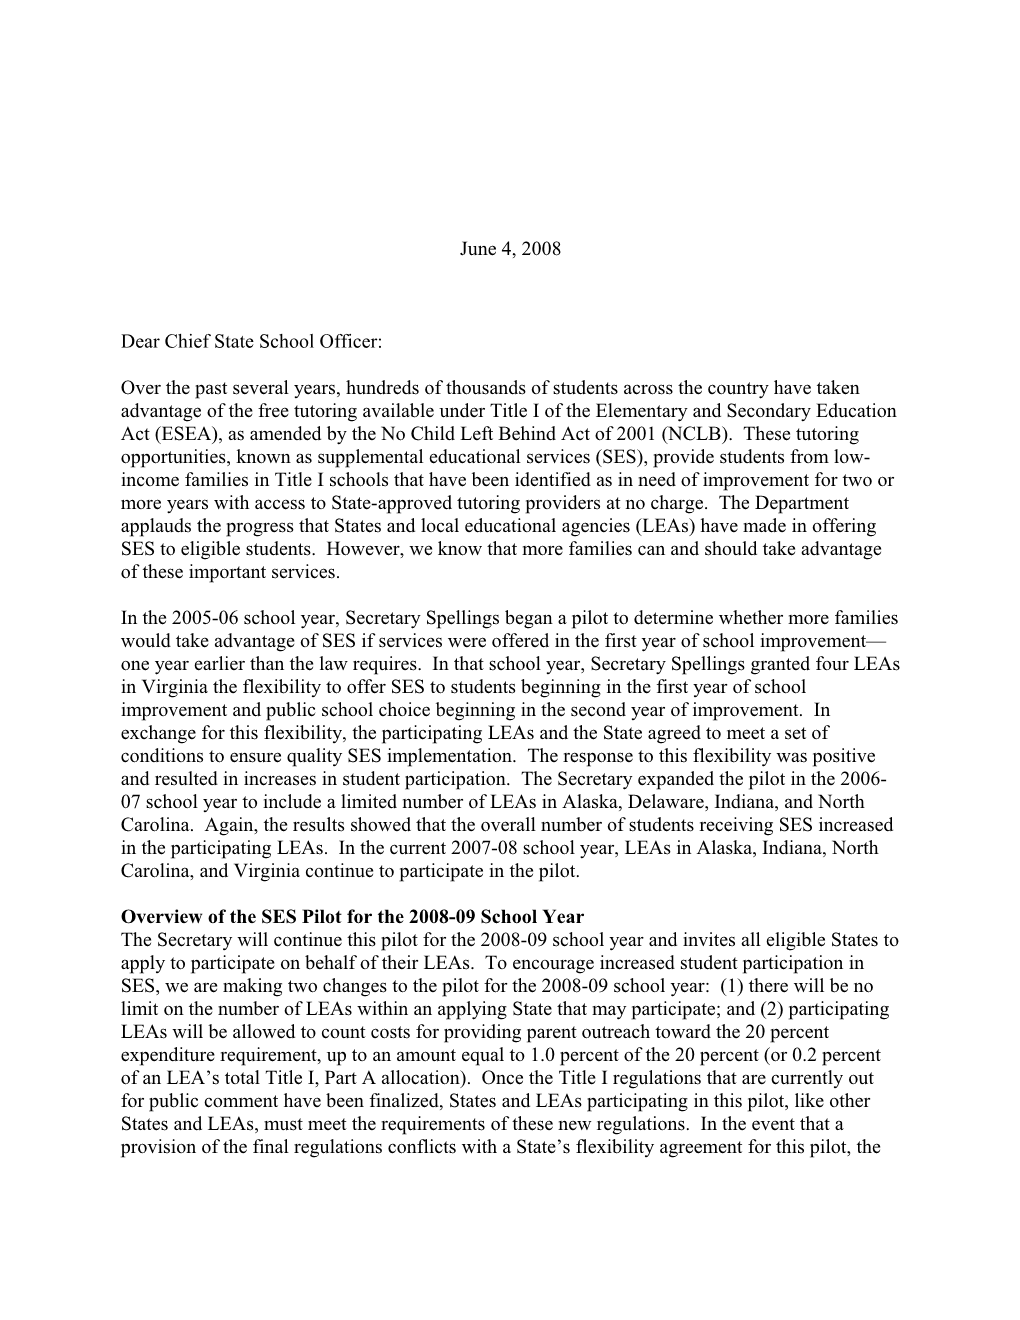 Letter to Chief State Officers Inviting Them to Participate in the 2008-09 SES Pilot Program